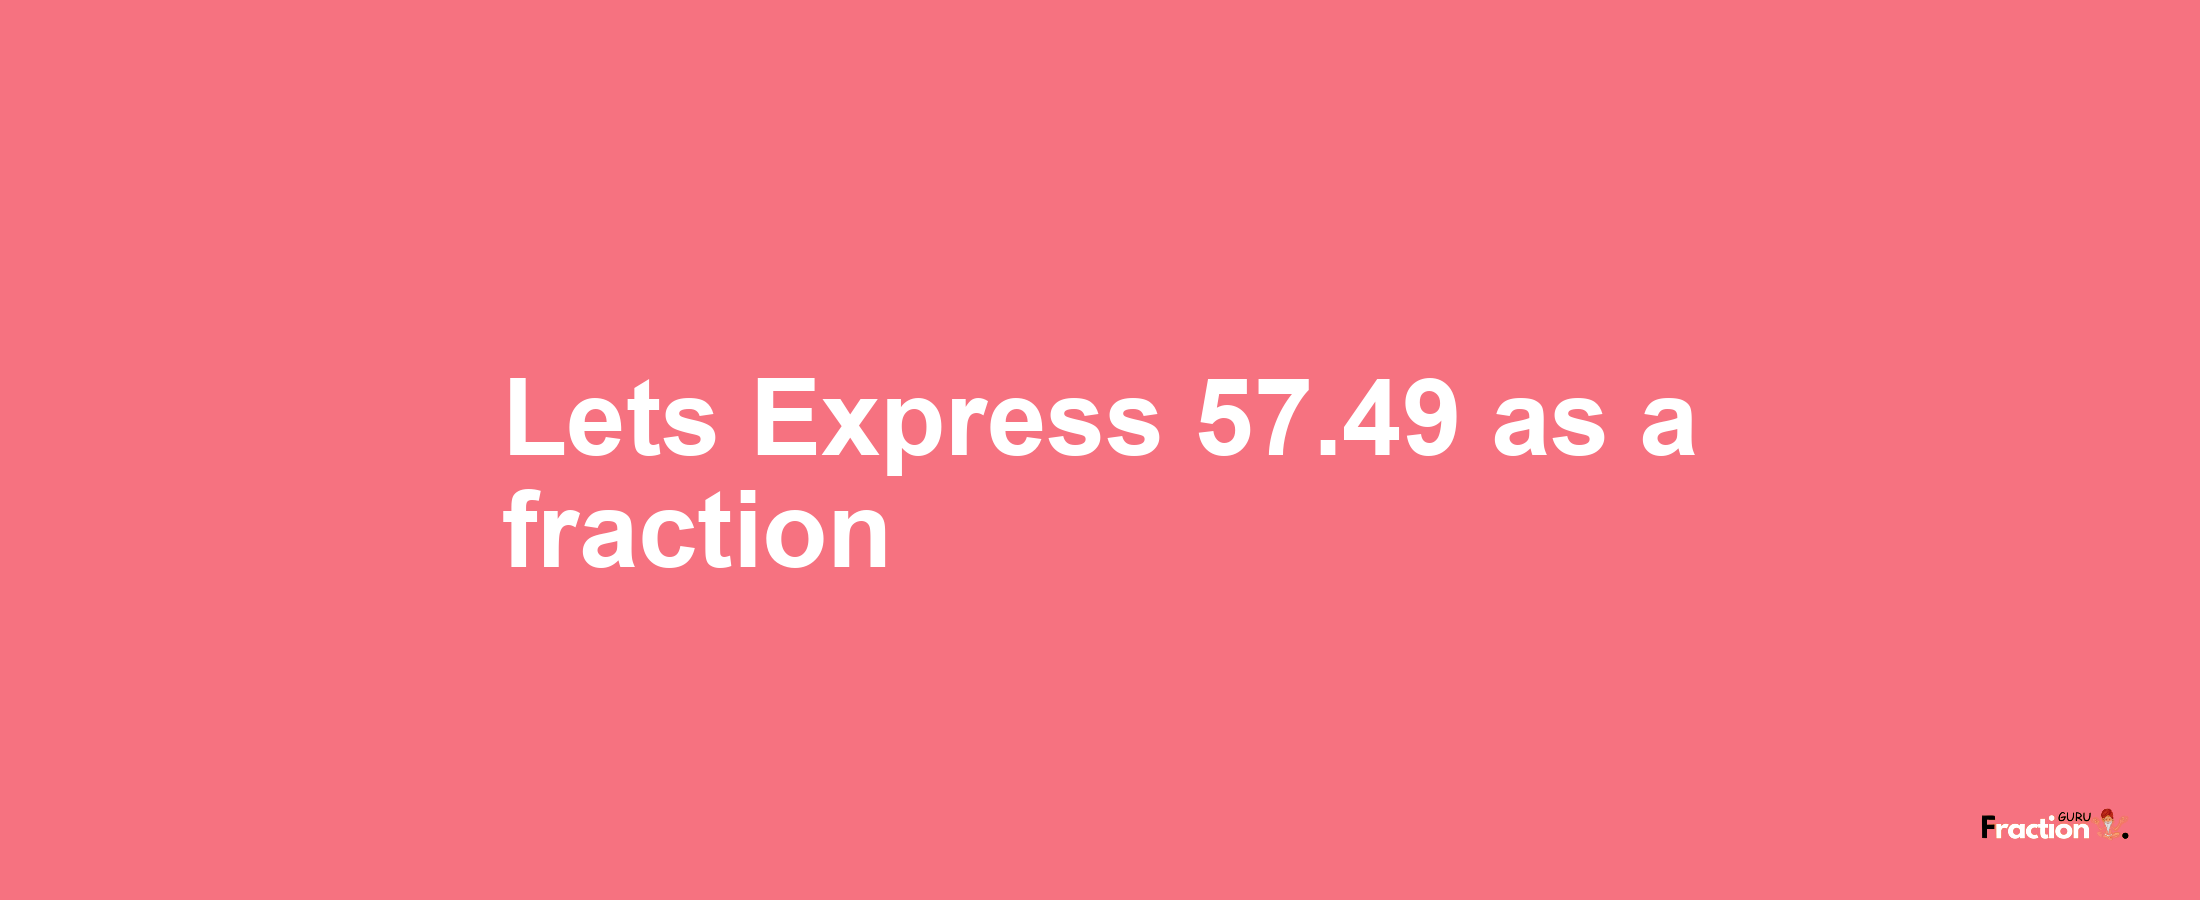 Lets Express 57.49 as afraction